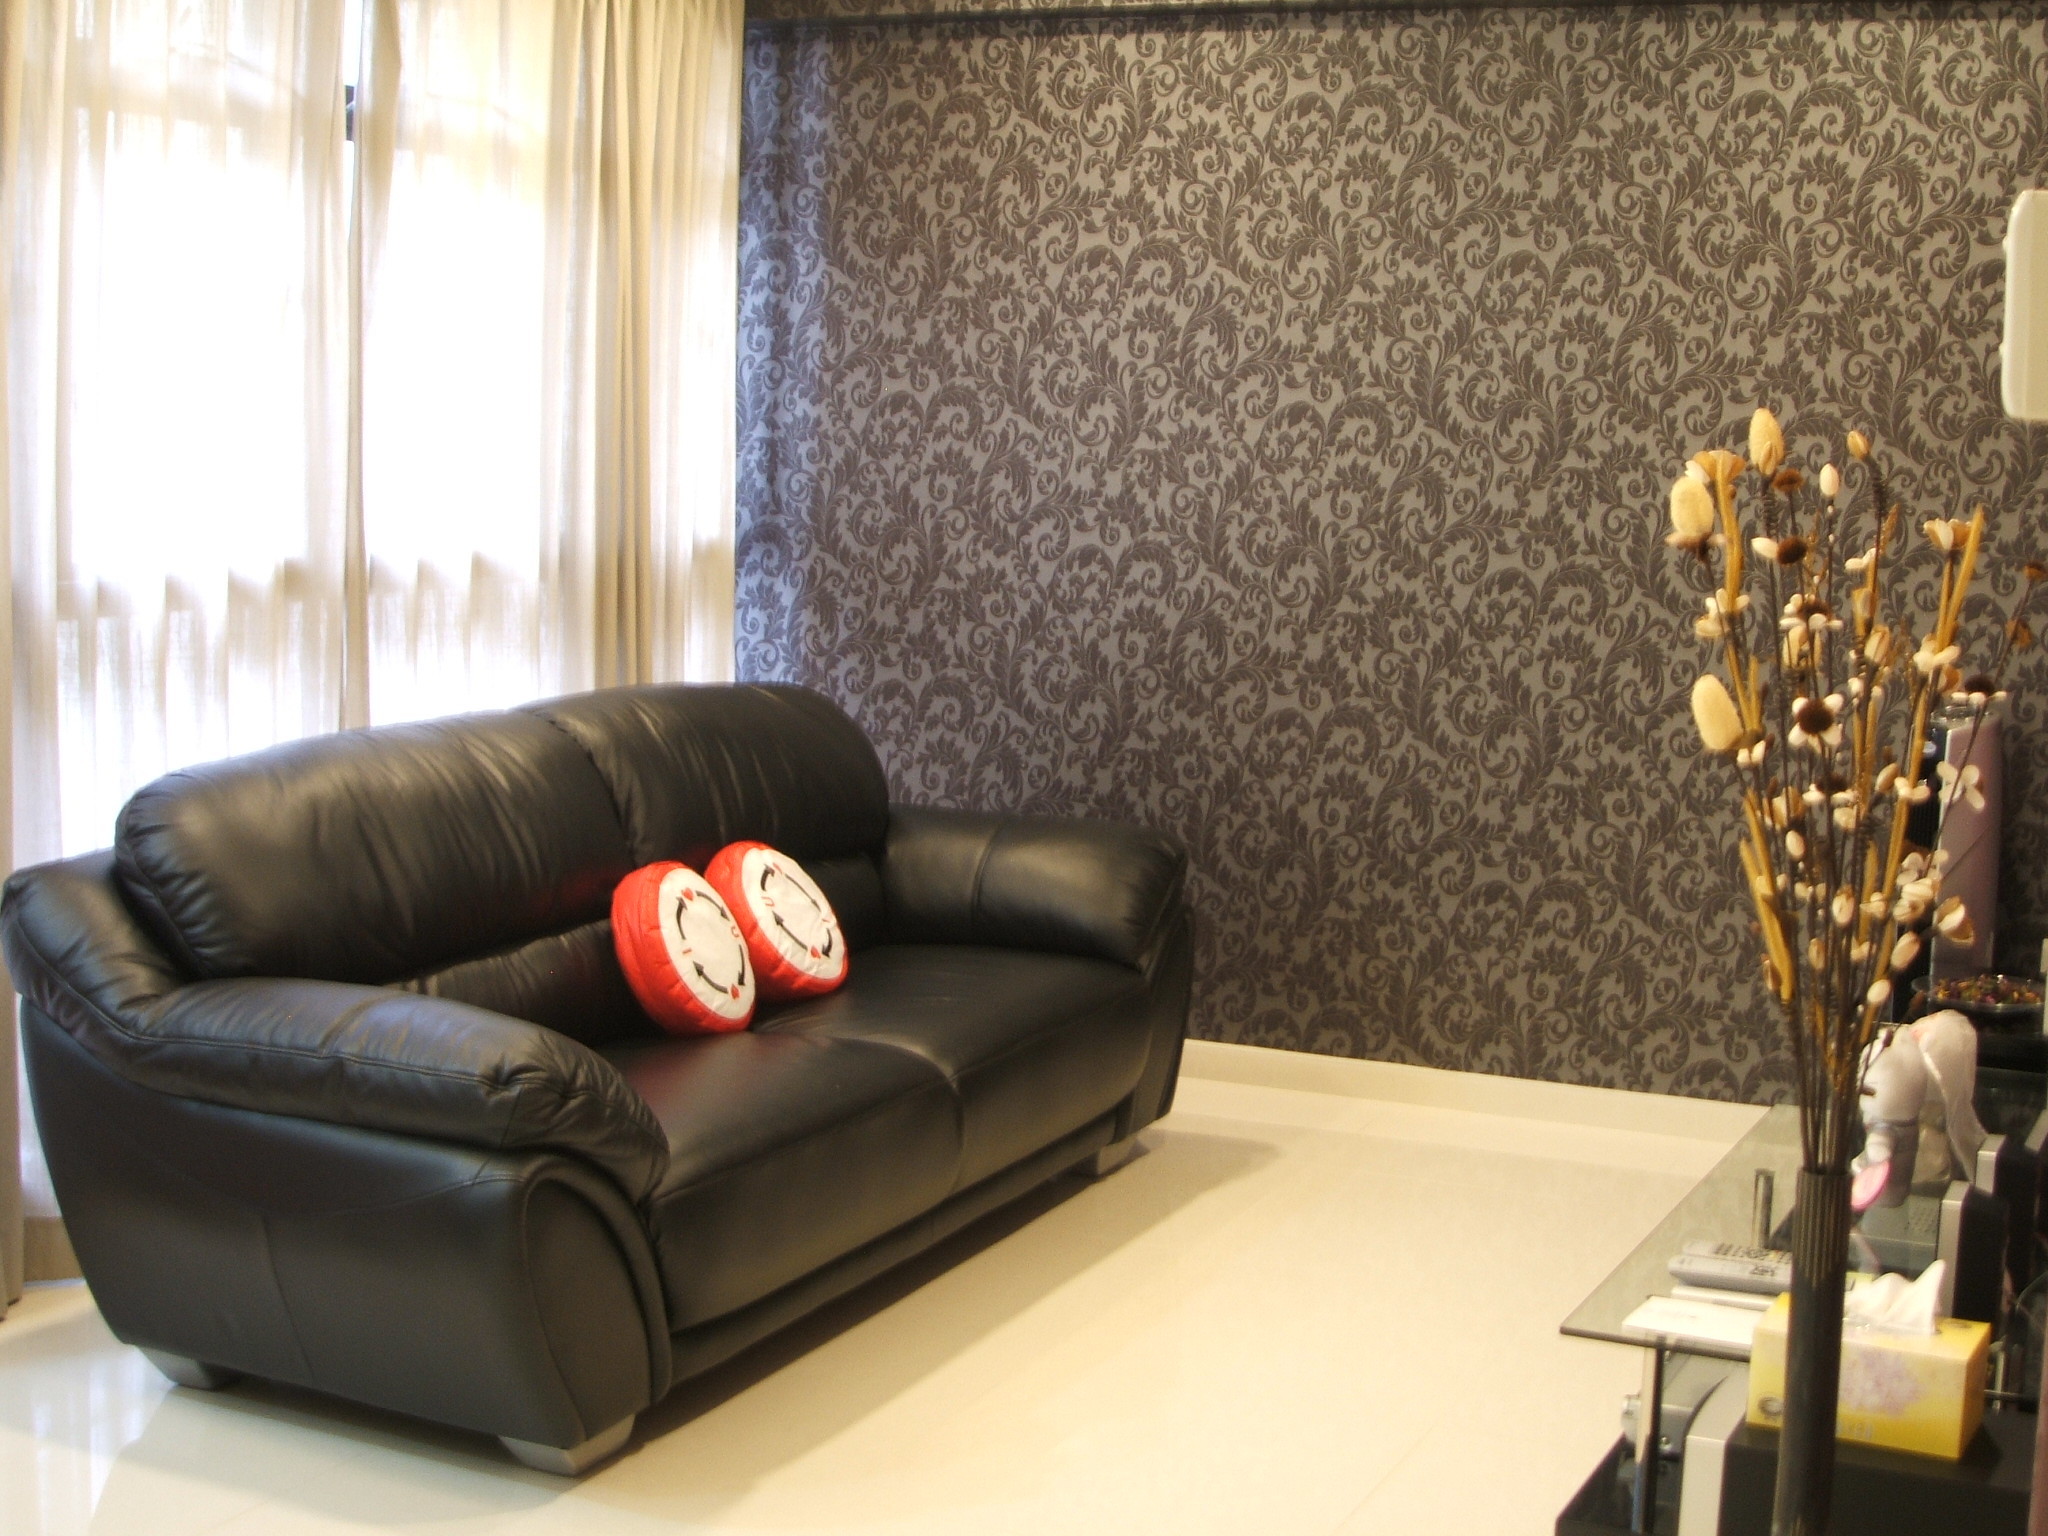 2048x1536 Our furniture is mostly black to complement our contemporary theme.